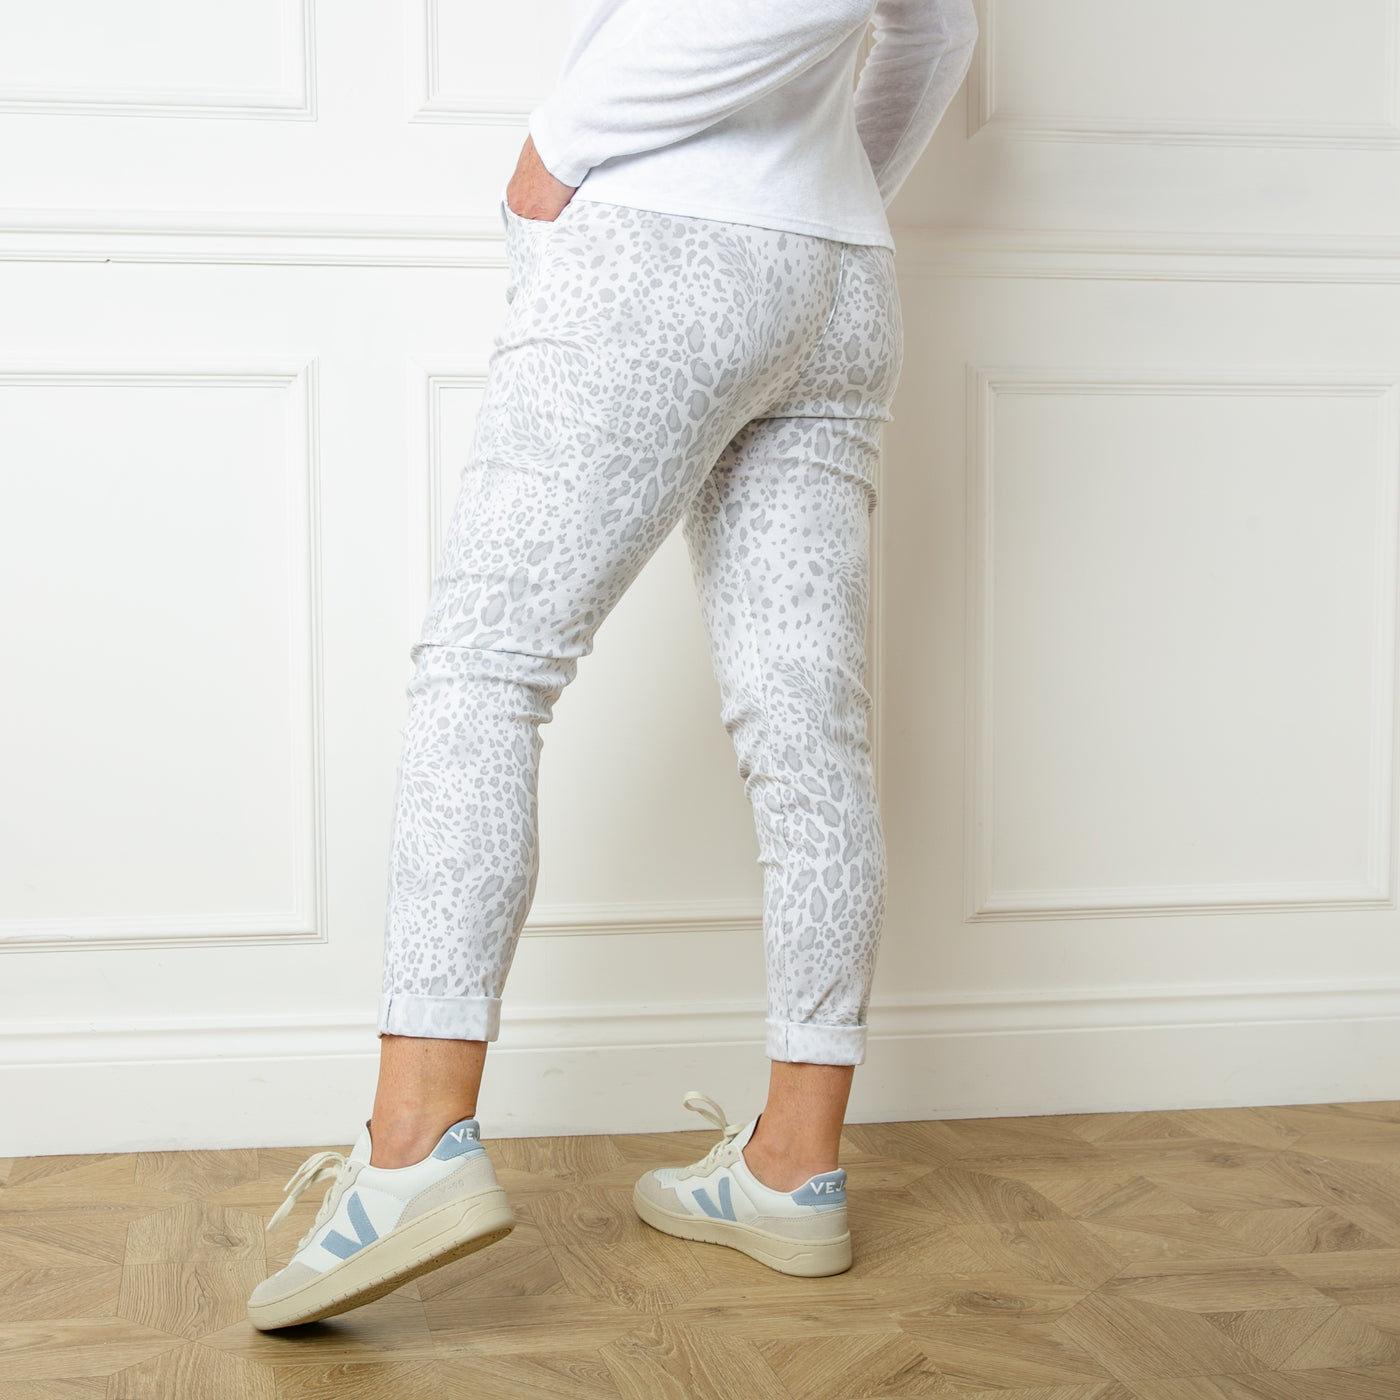 The white Animal Print Stretch Trousers with a drawstring elasticated waistband and pockets on either side